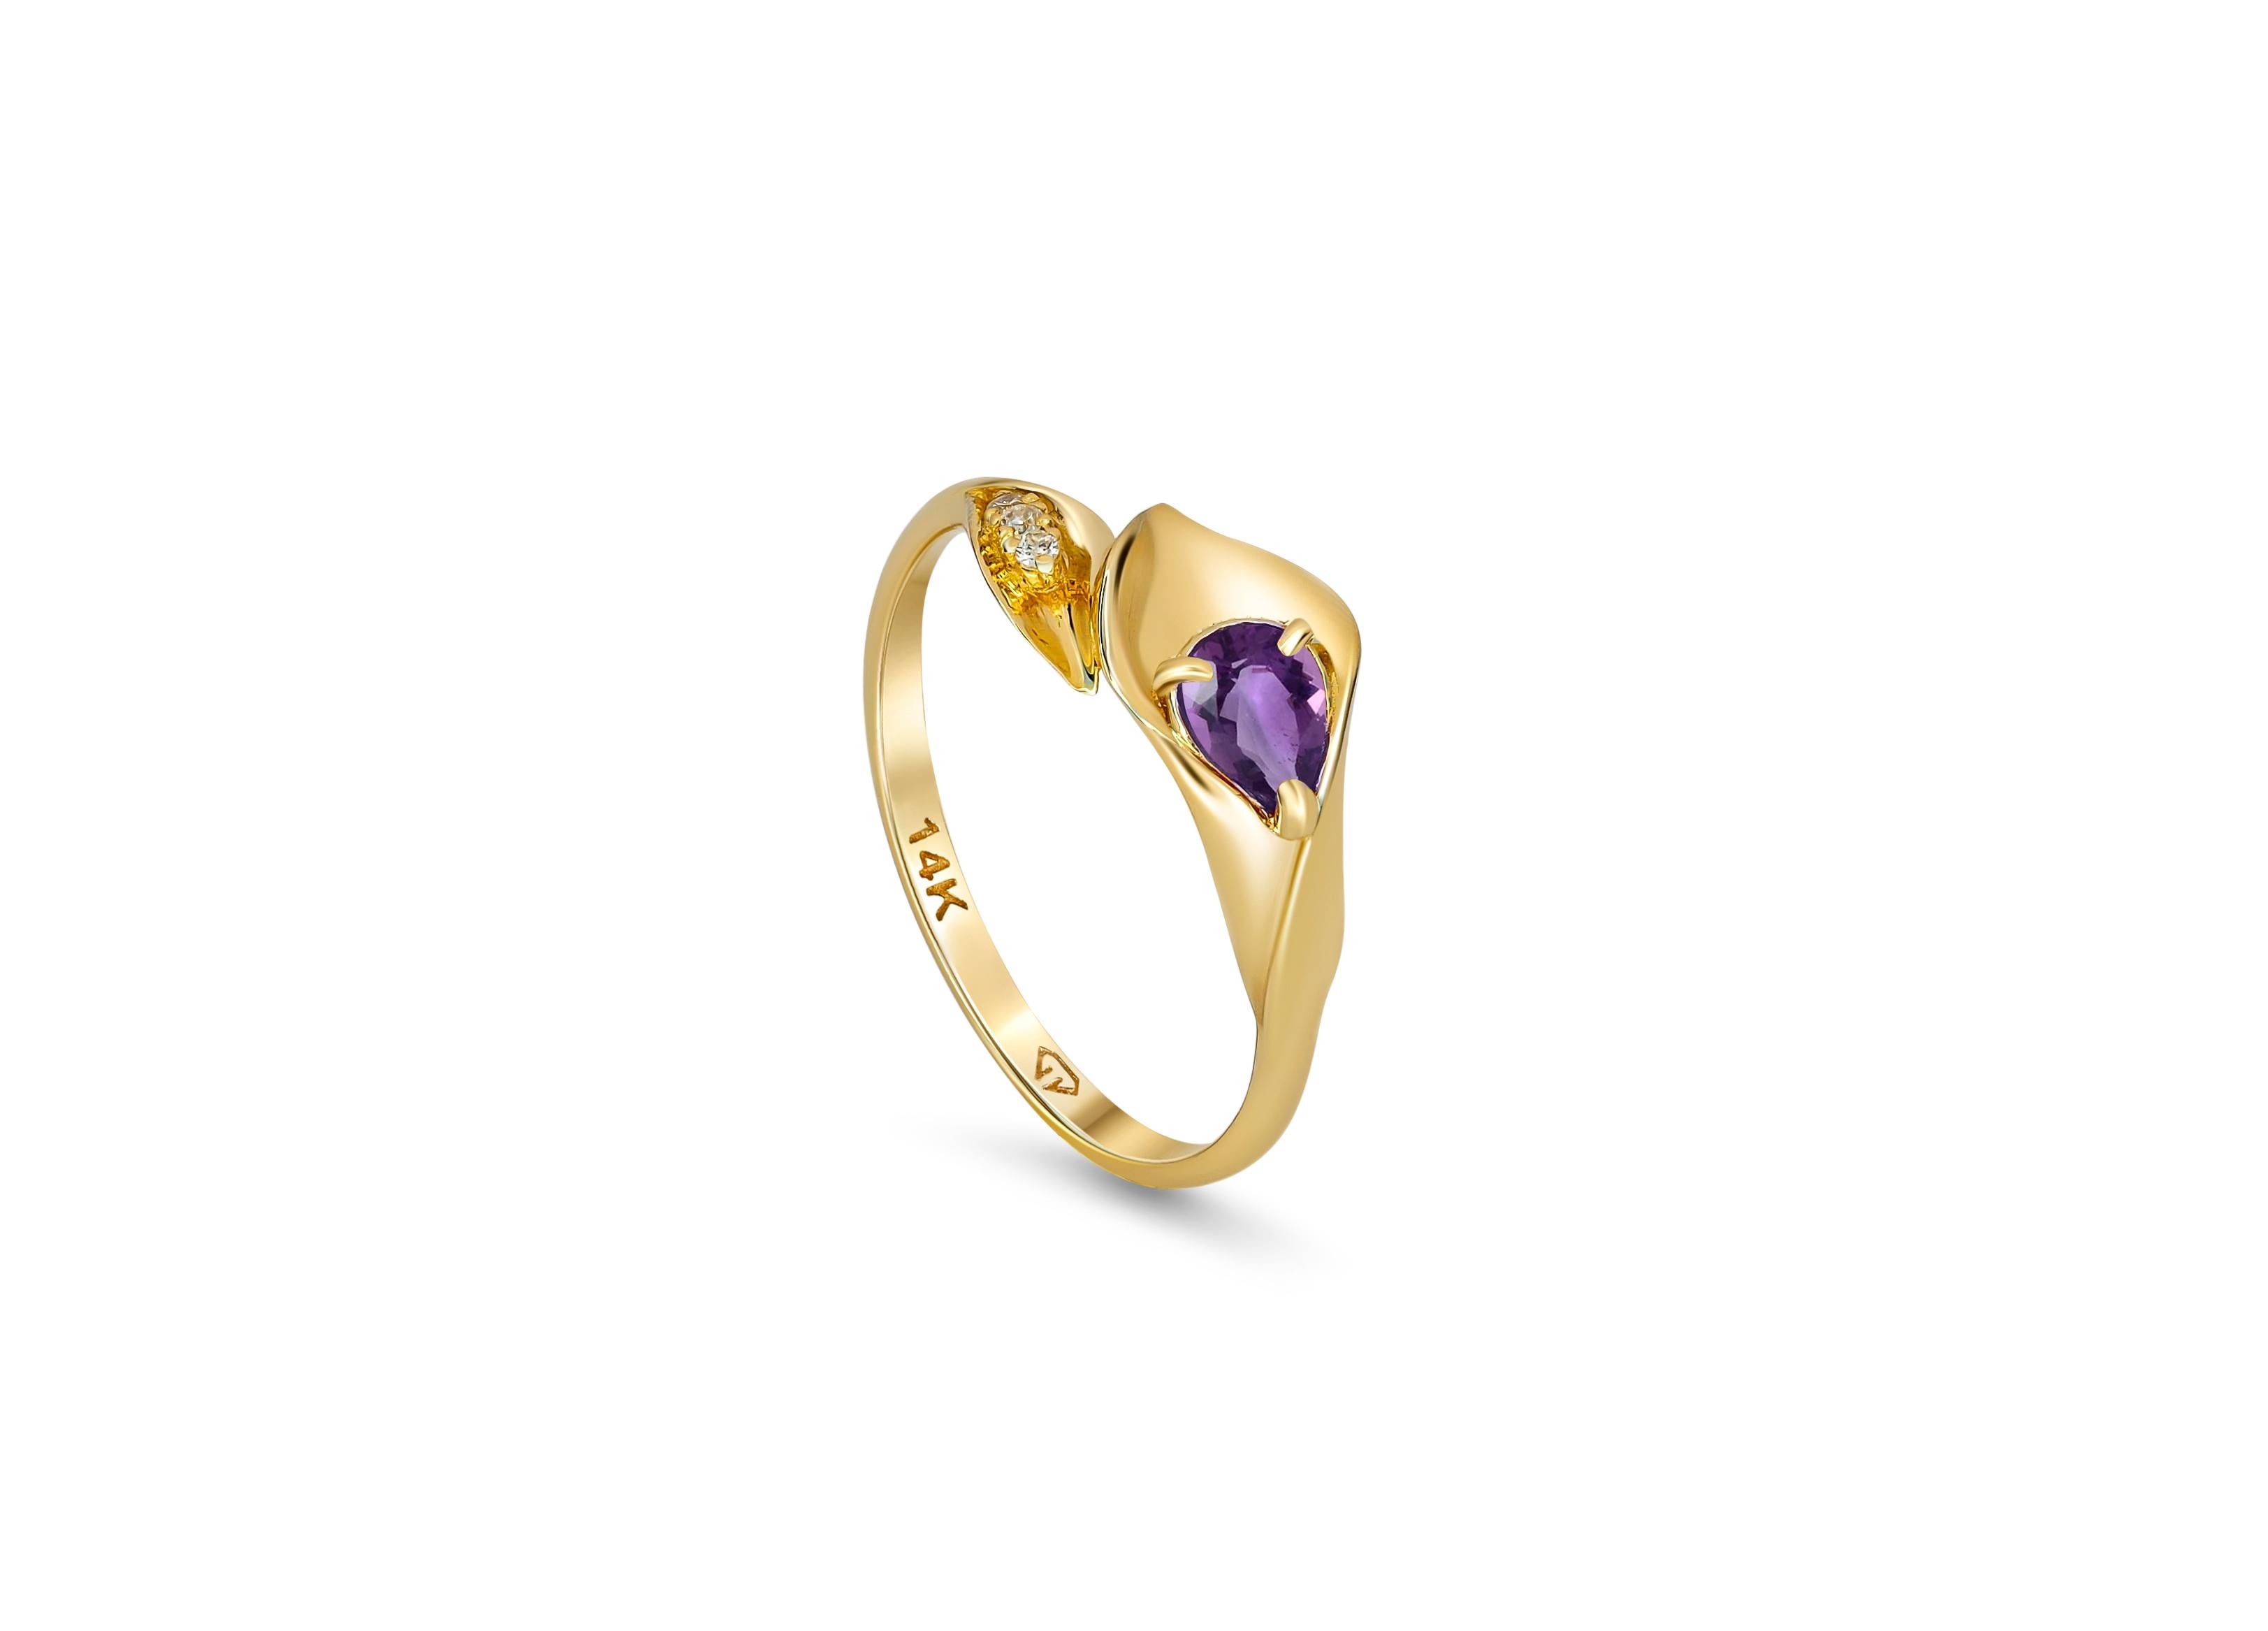 For Sale:  Lily Calla Gold Ring, 14 Karat Gold Ring with Amethyst and Diamonds 5